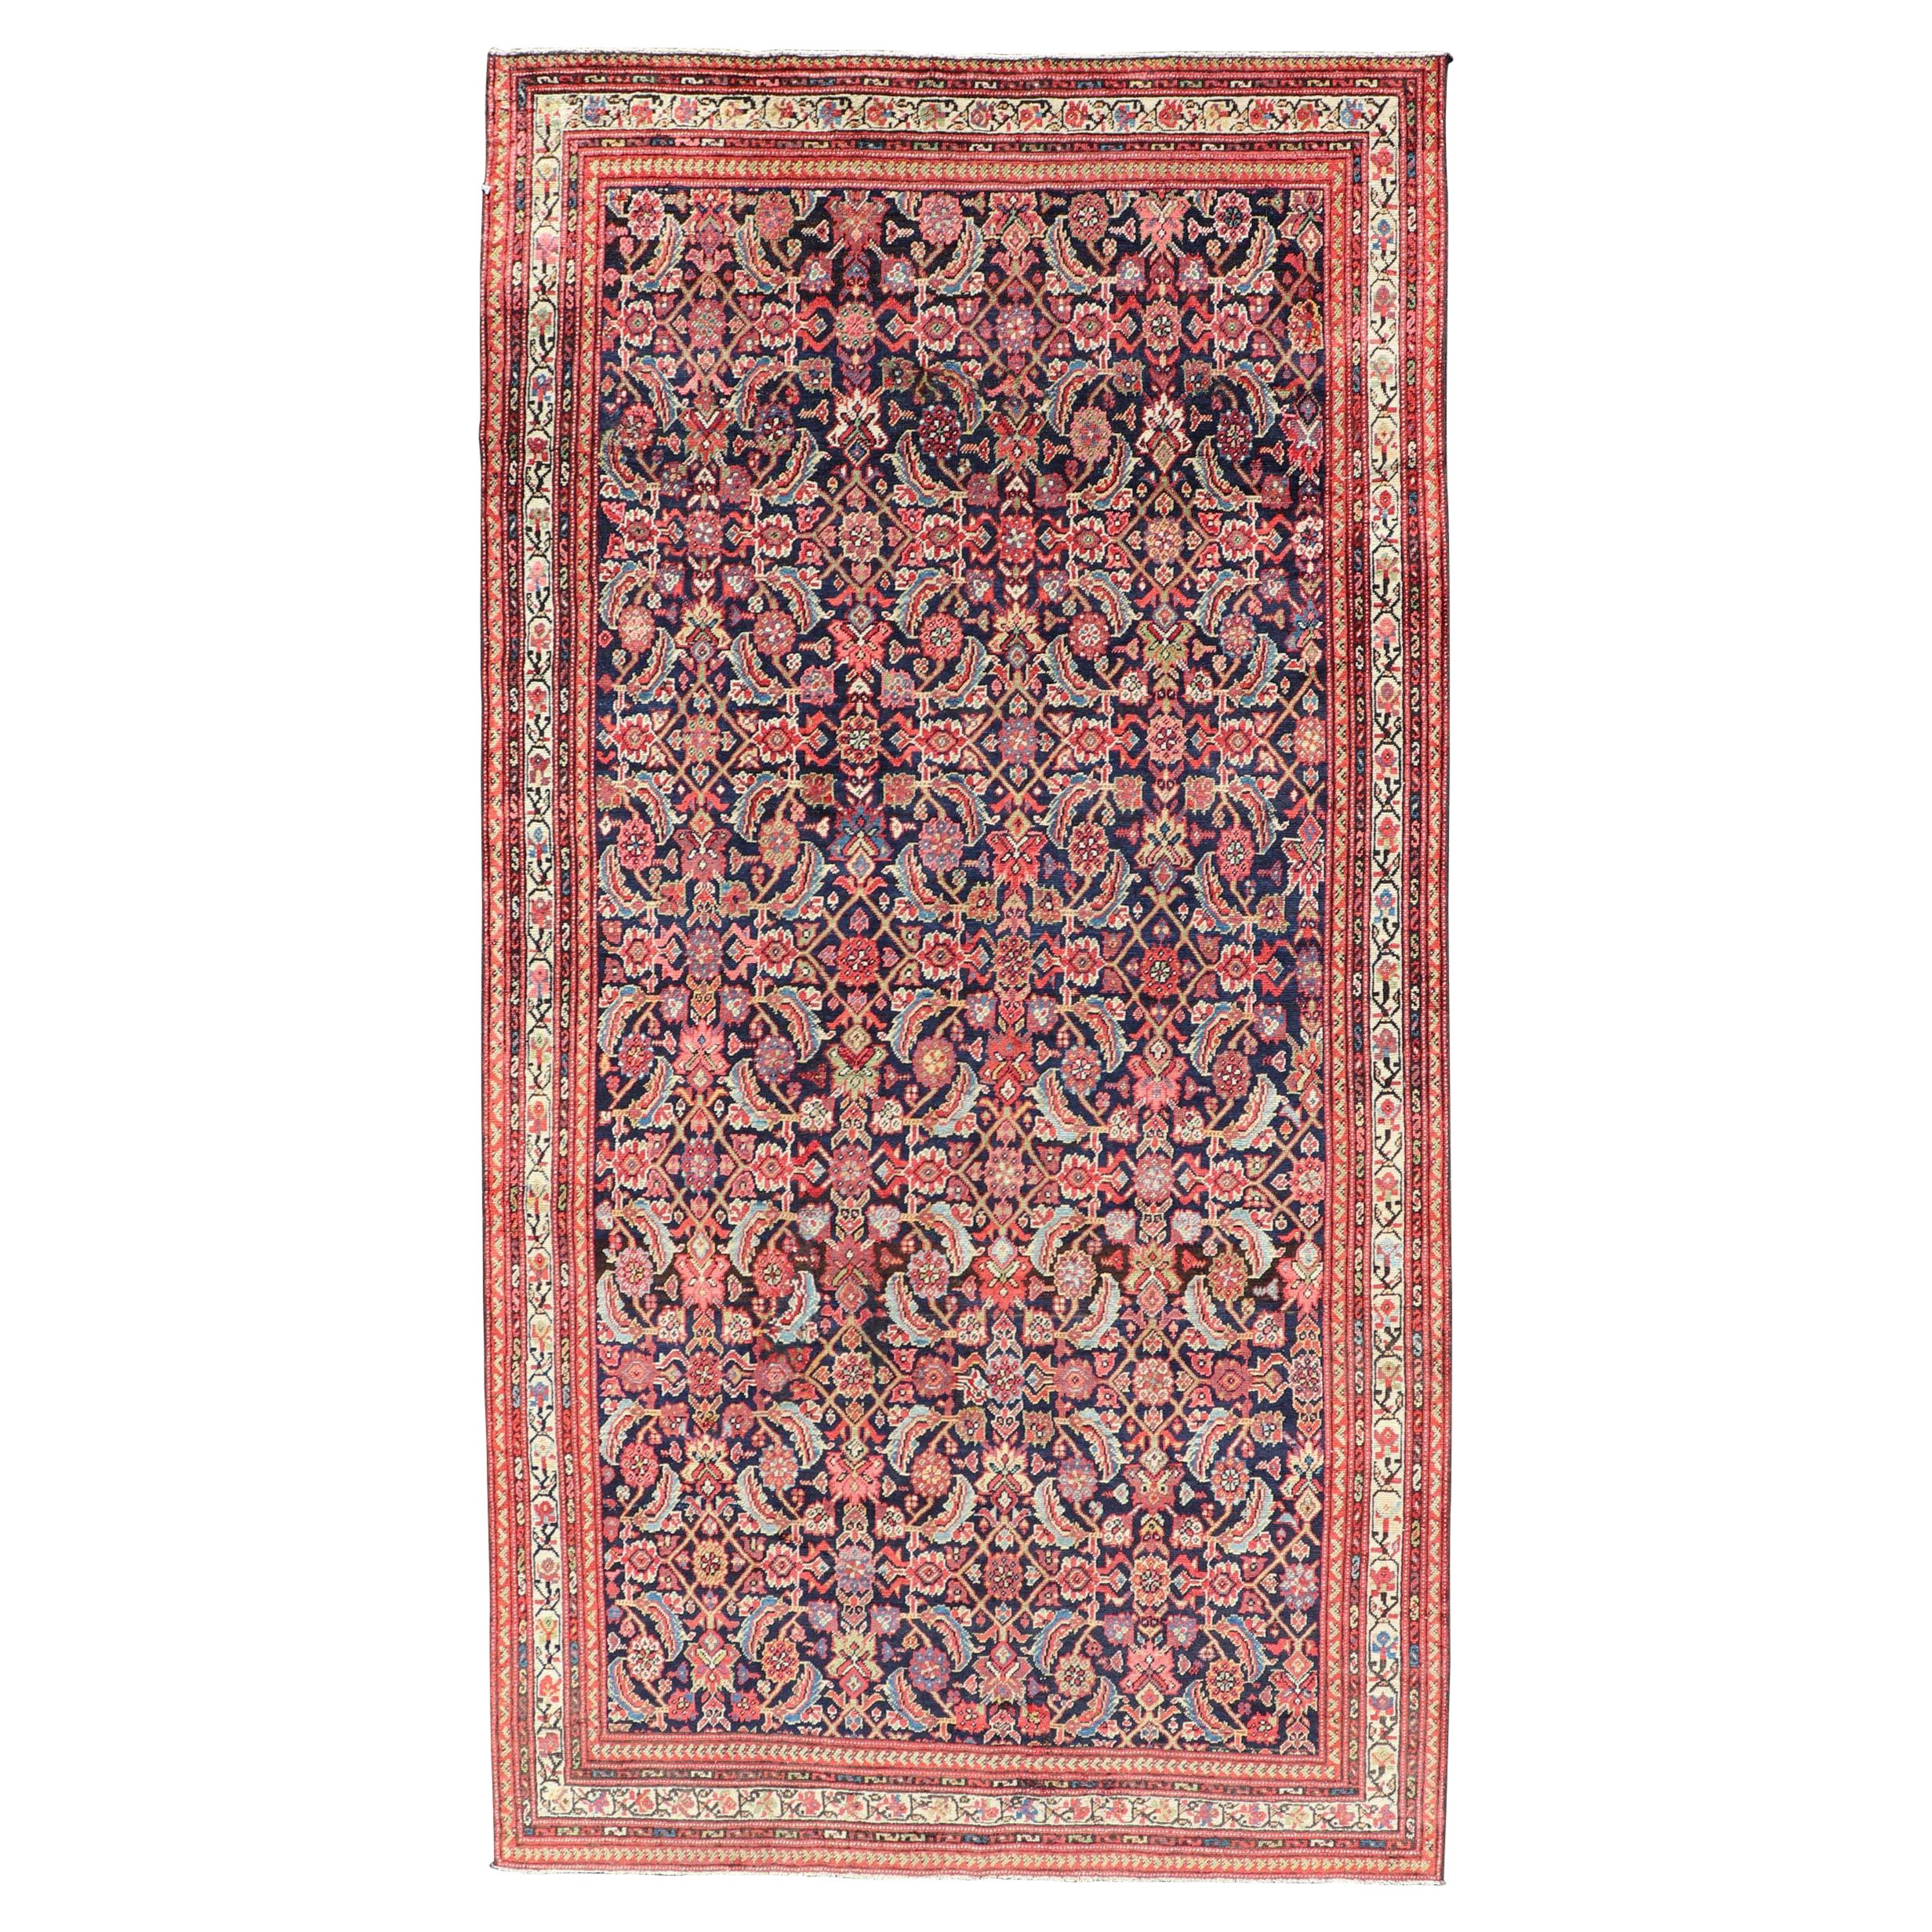 Antique Persian Malayer Rug with All over Herati Design in Blue's and Red's